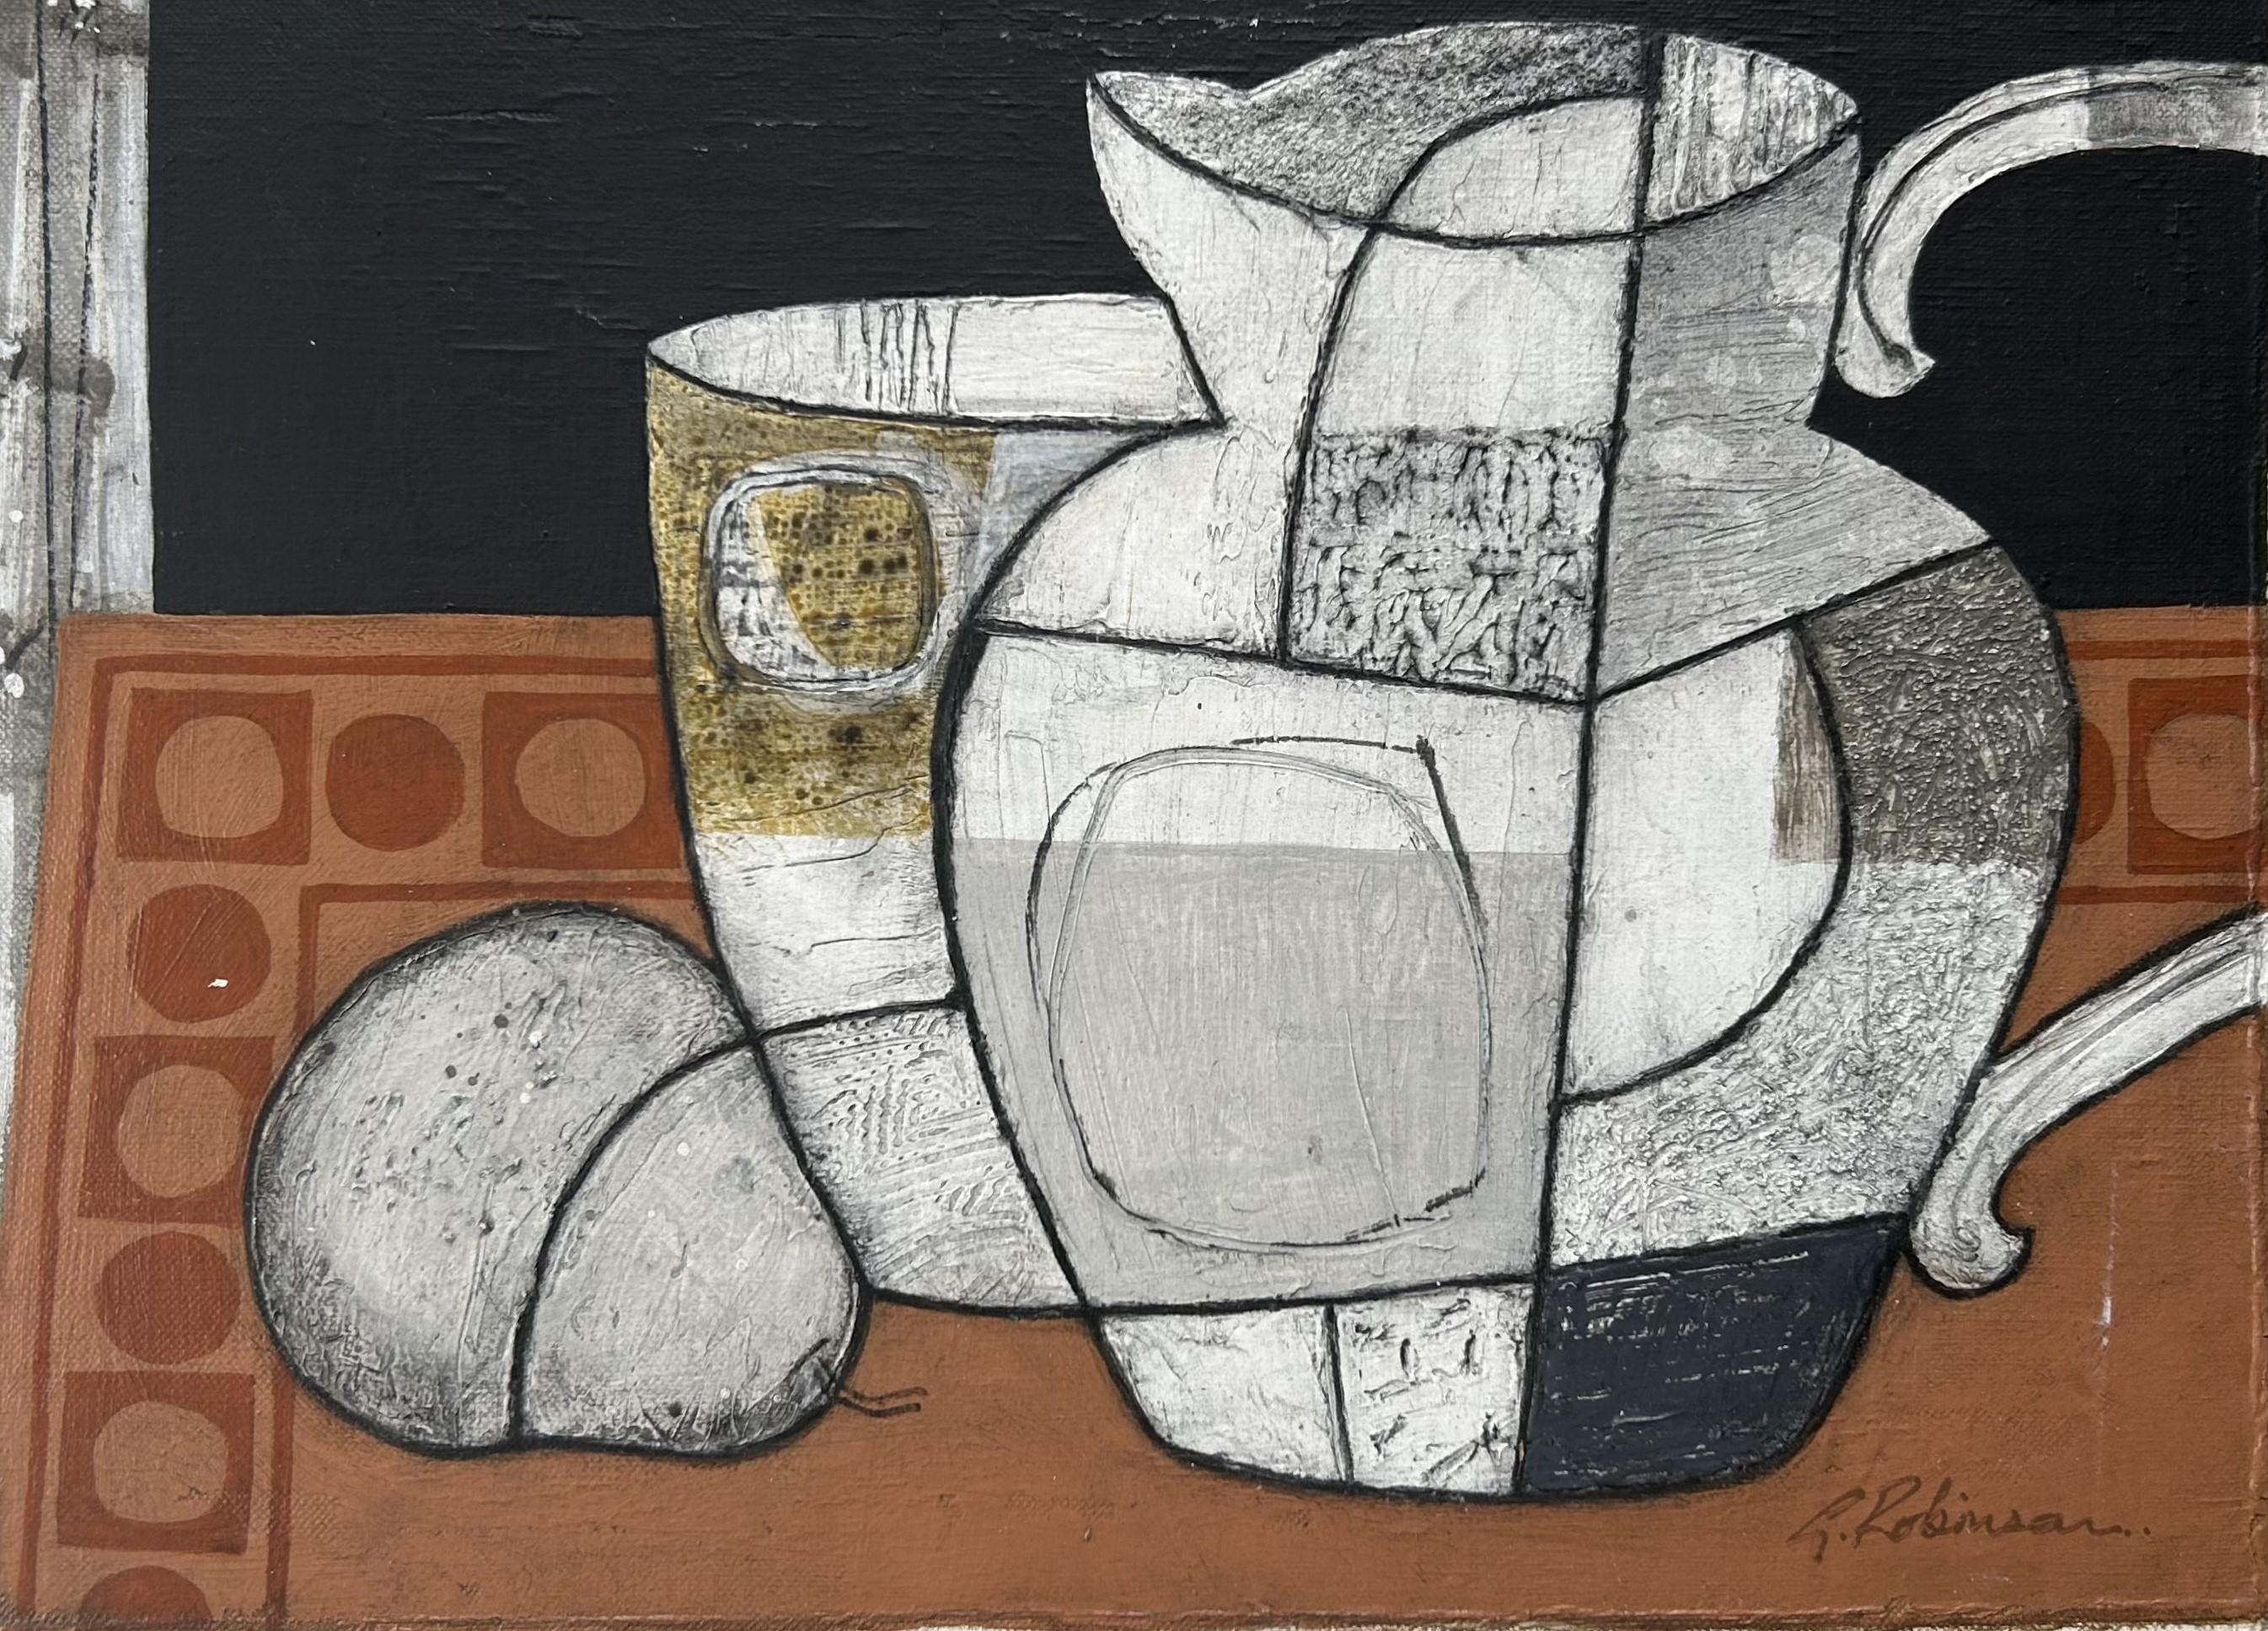 ROBINSON, Geoffrey (b.1945)
Still Life with Pear
2000
28.0 x 38.0 cm
Unstretched and Unframed canvas

Geoffrey Robinson trained at Bournemouth College of Art in the 1960’s, before a career in advertising and music. Since the 1990’s he began a full